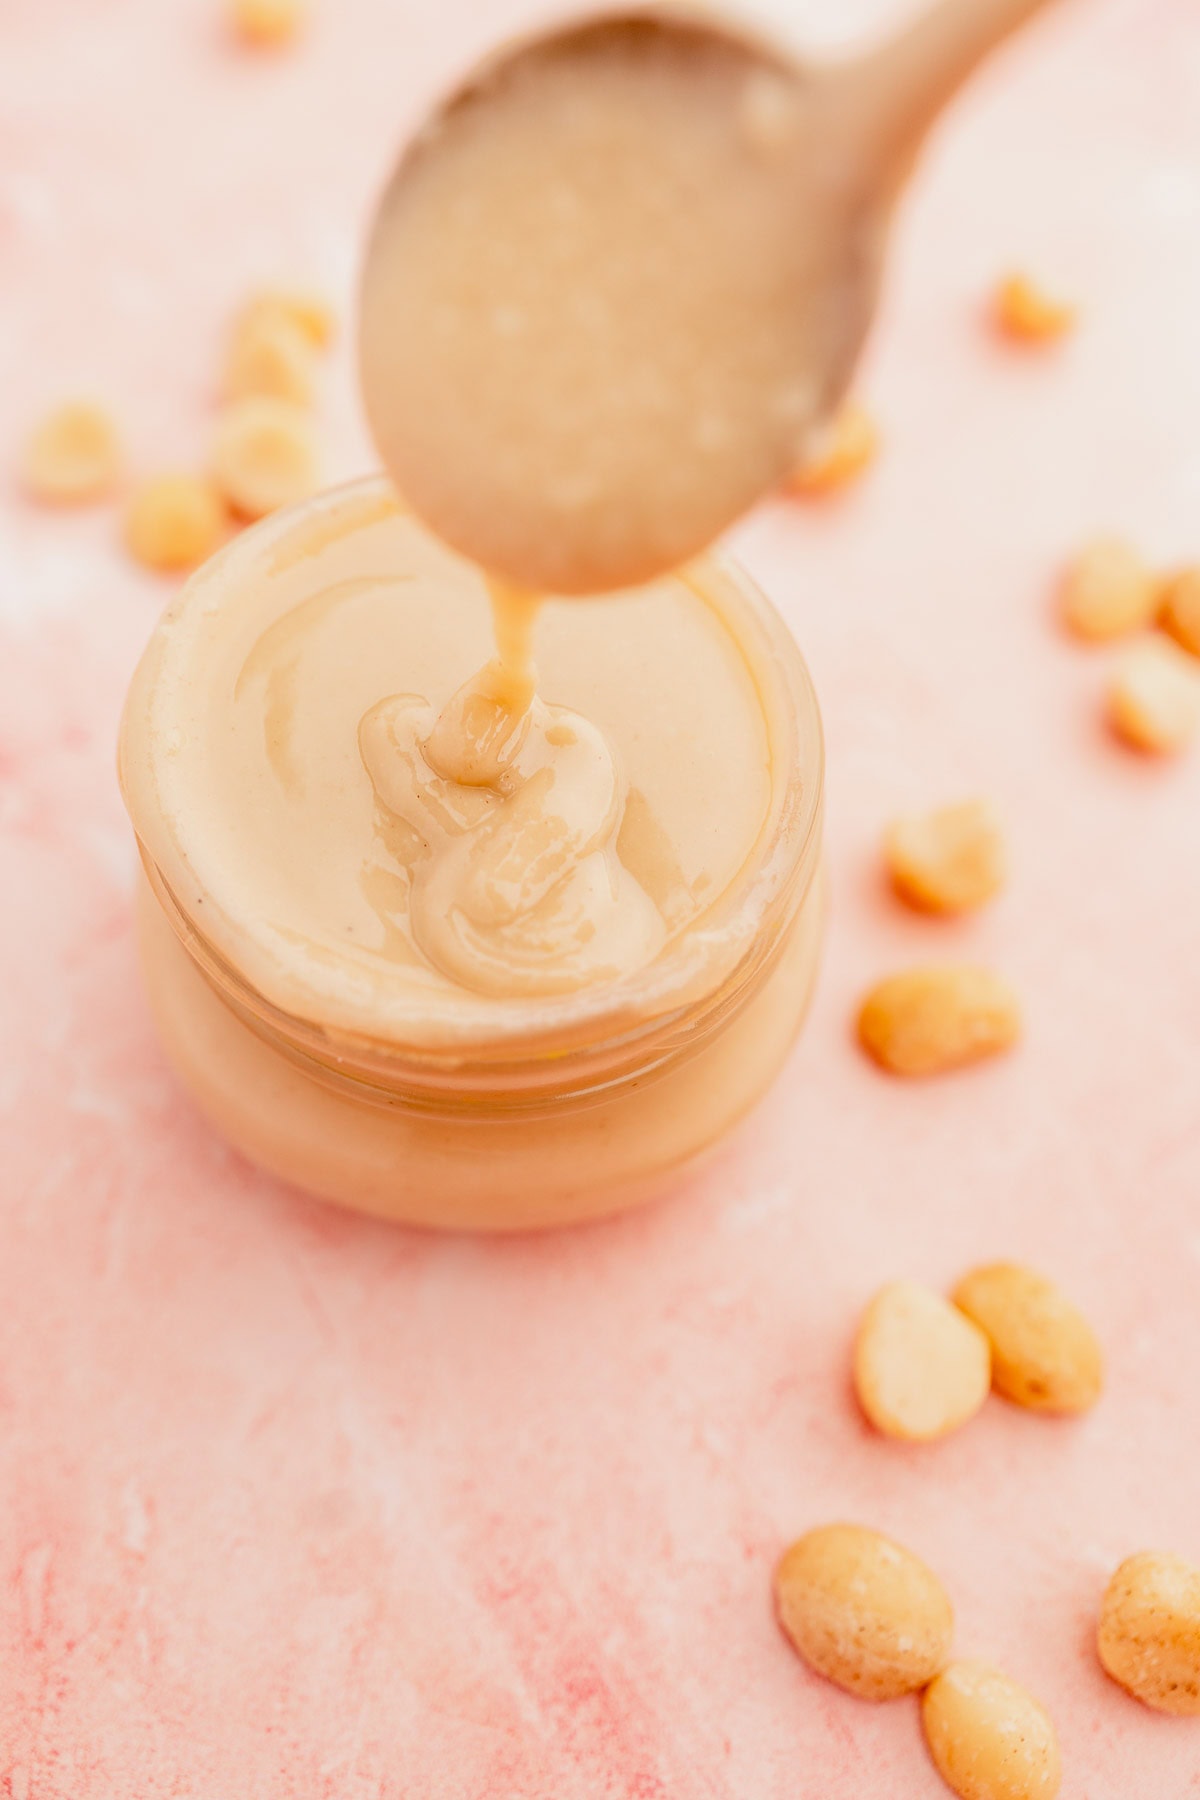 A spoon pours smooth macadamia nut butter into a jar surrounded by whole peanuts on a pink surface.